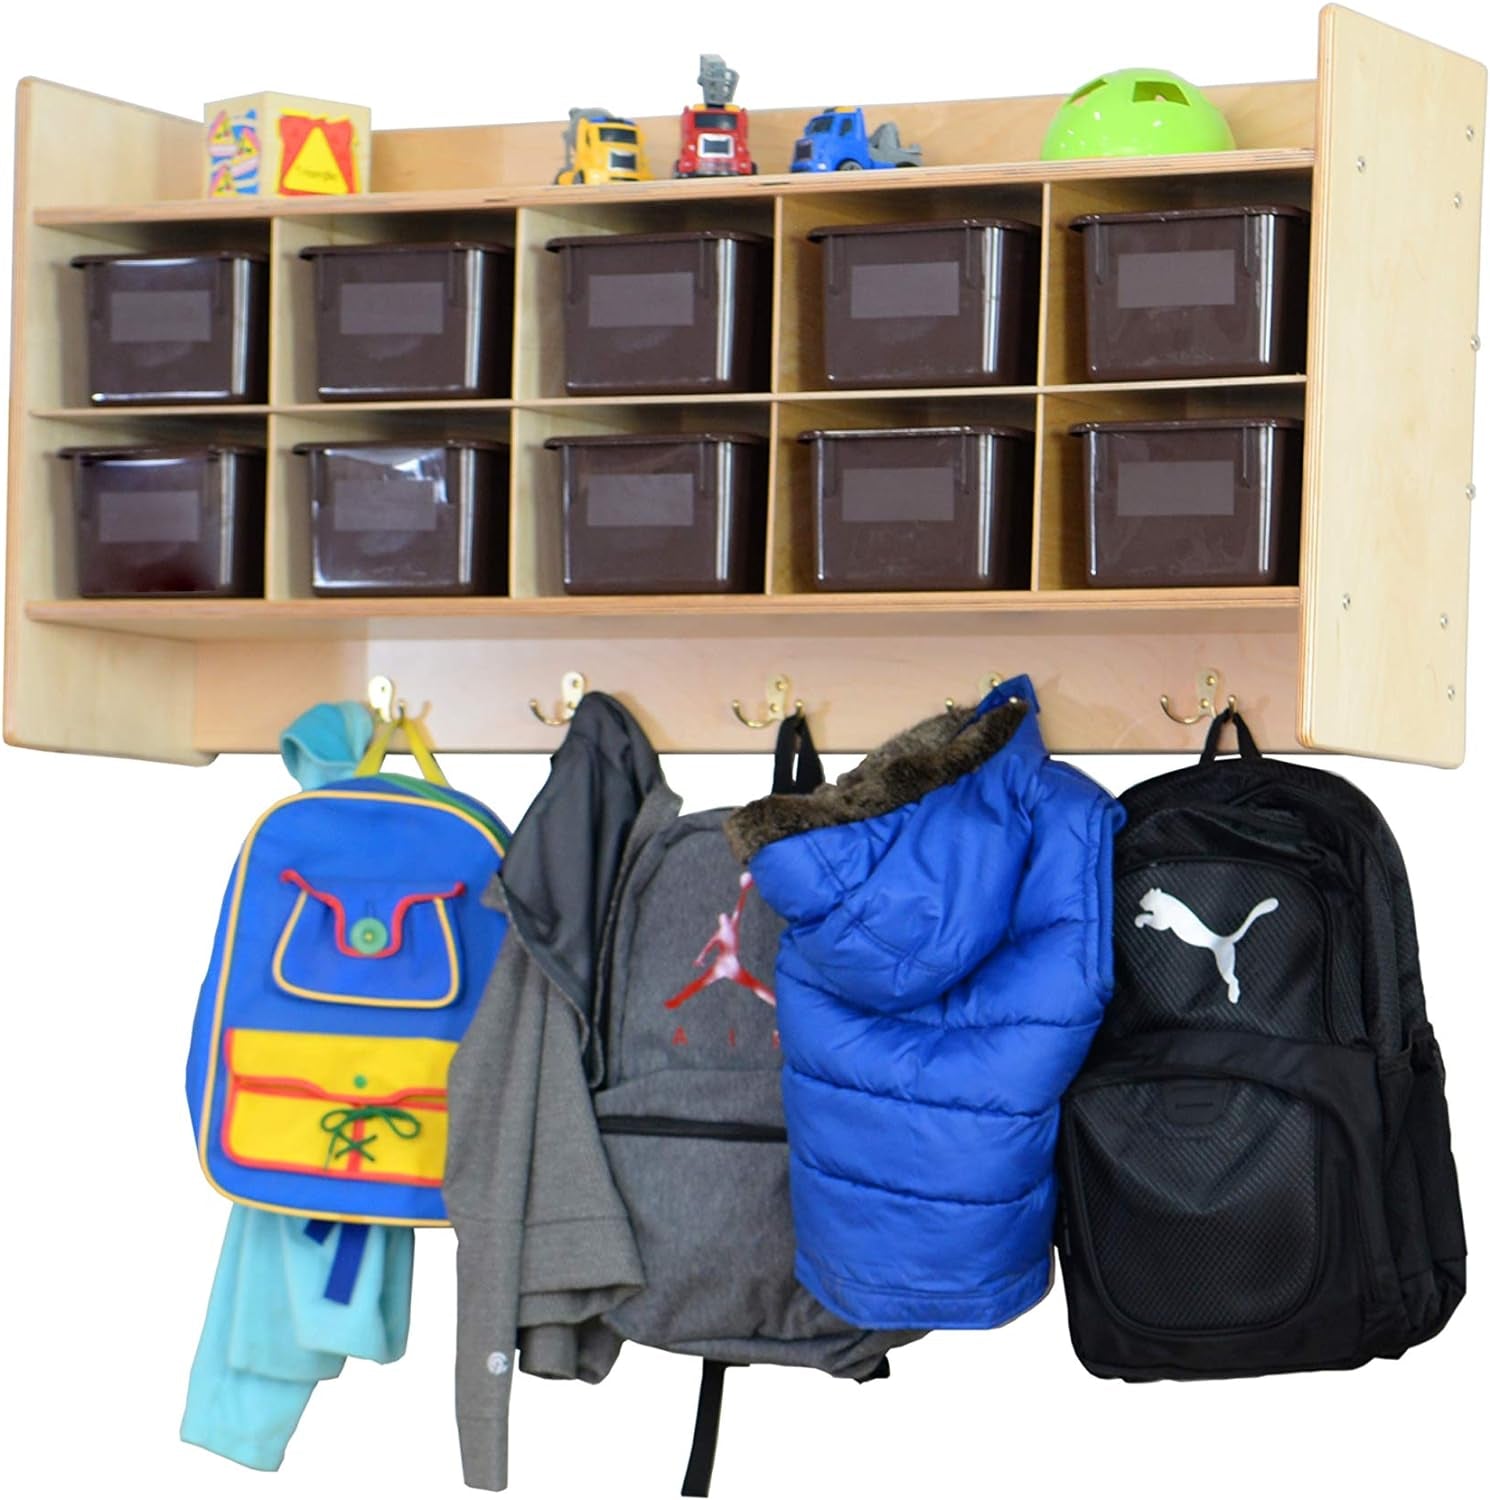 10 Section Wall Cubby Shelve with Brown Plastic Storage Containers for Organizing House and Playrooms, 100% Birch Plywood and UV Finish